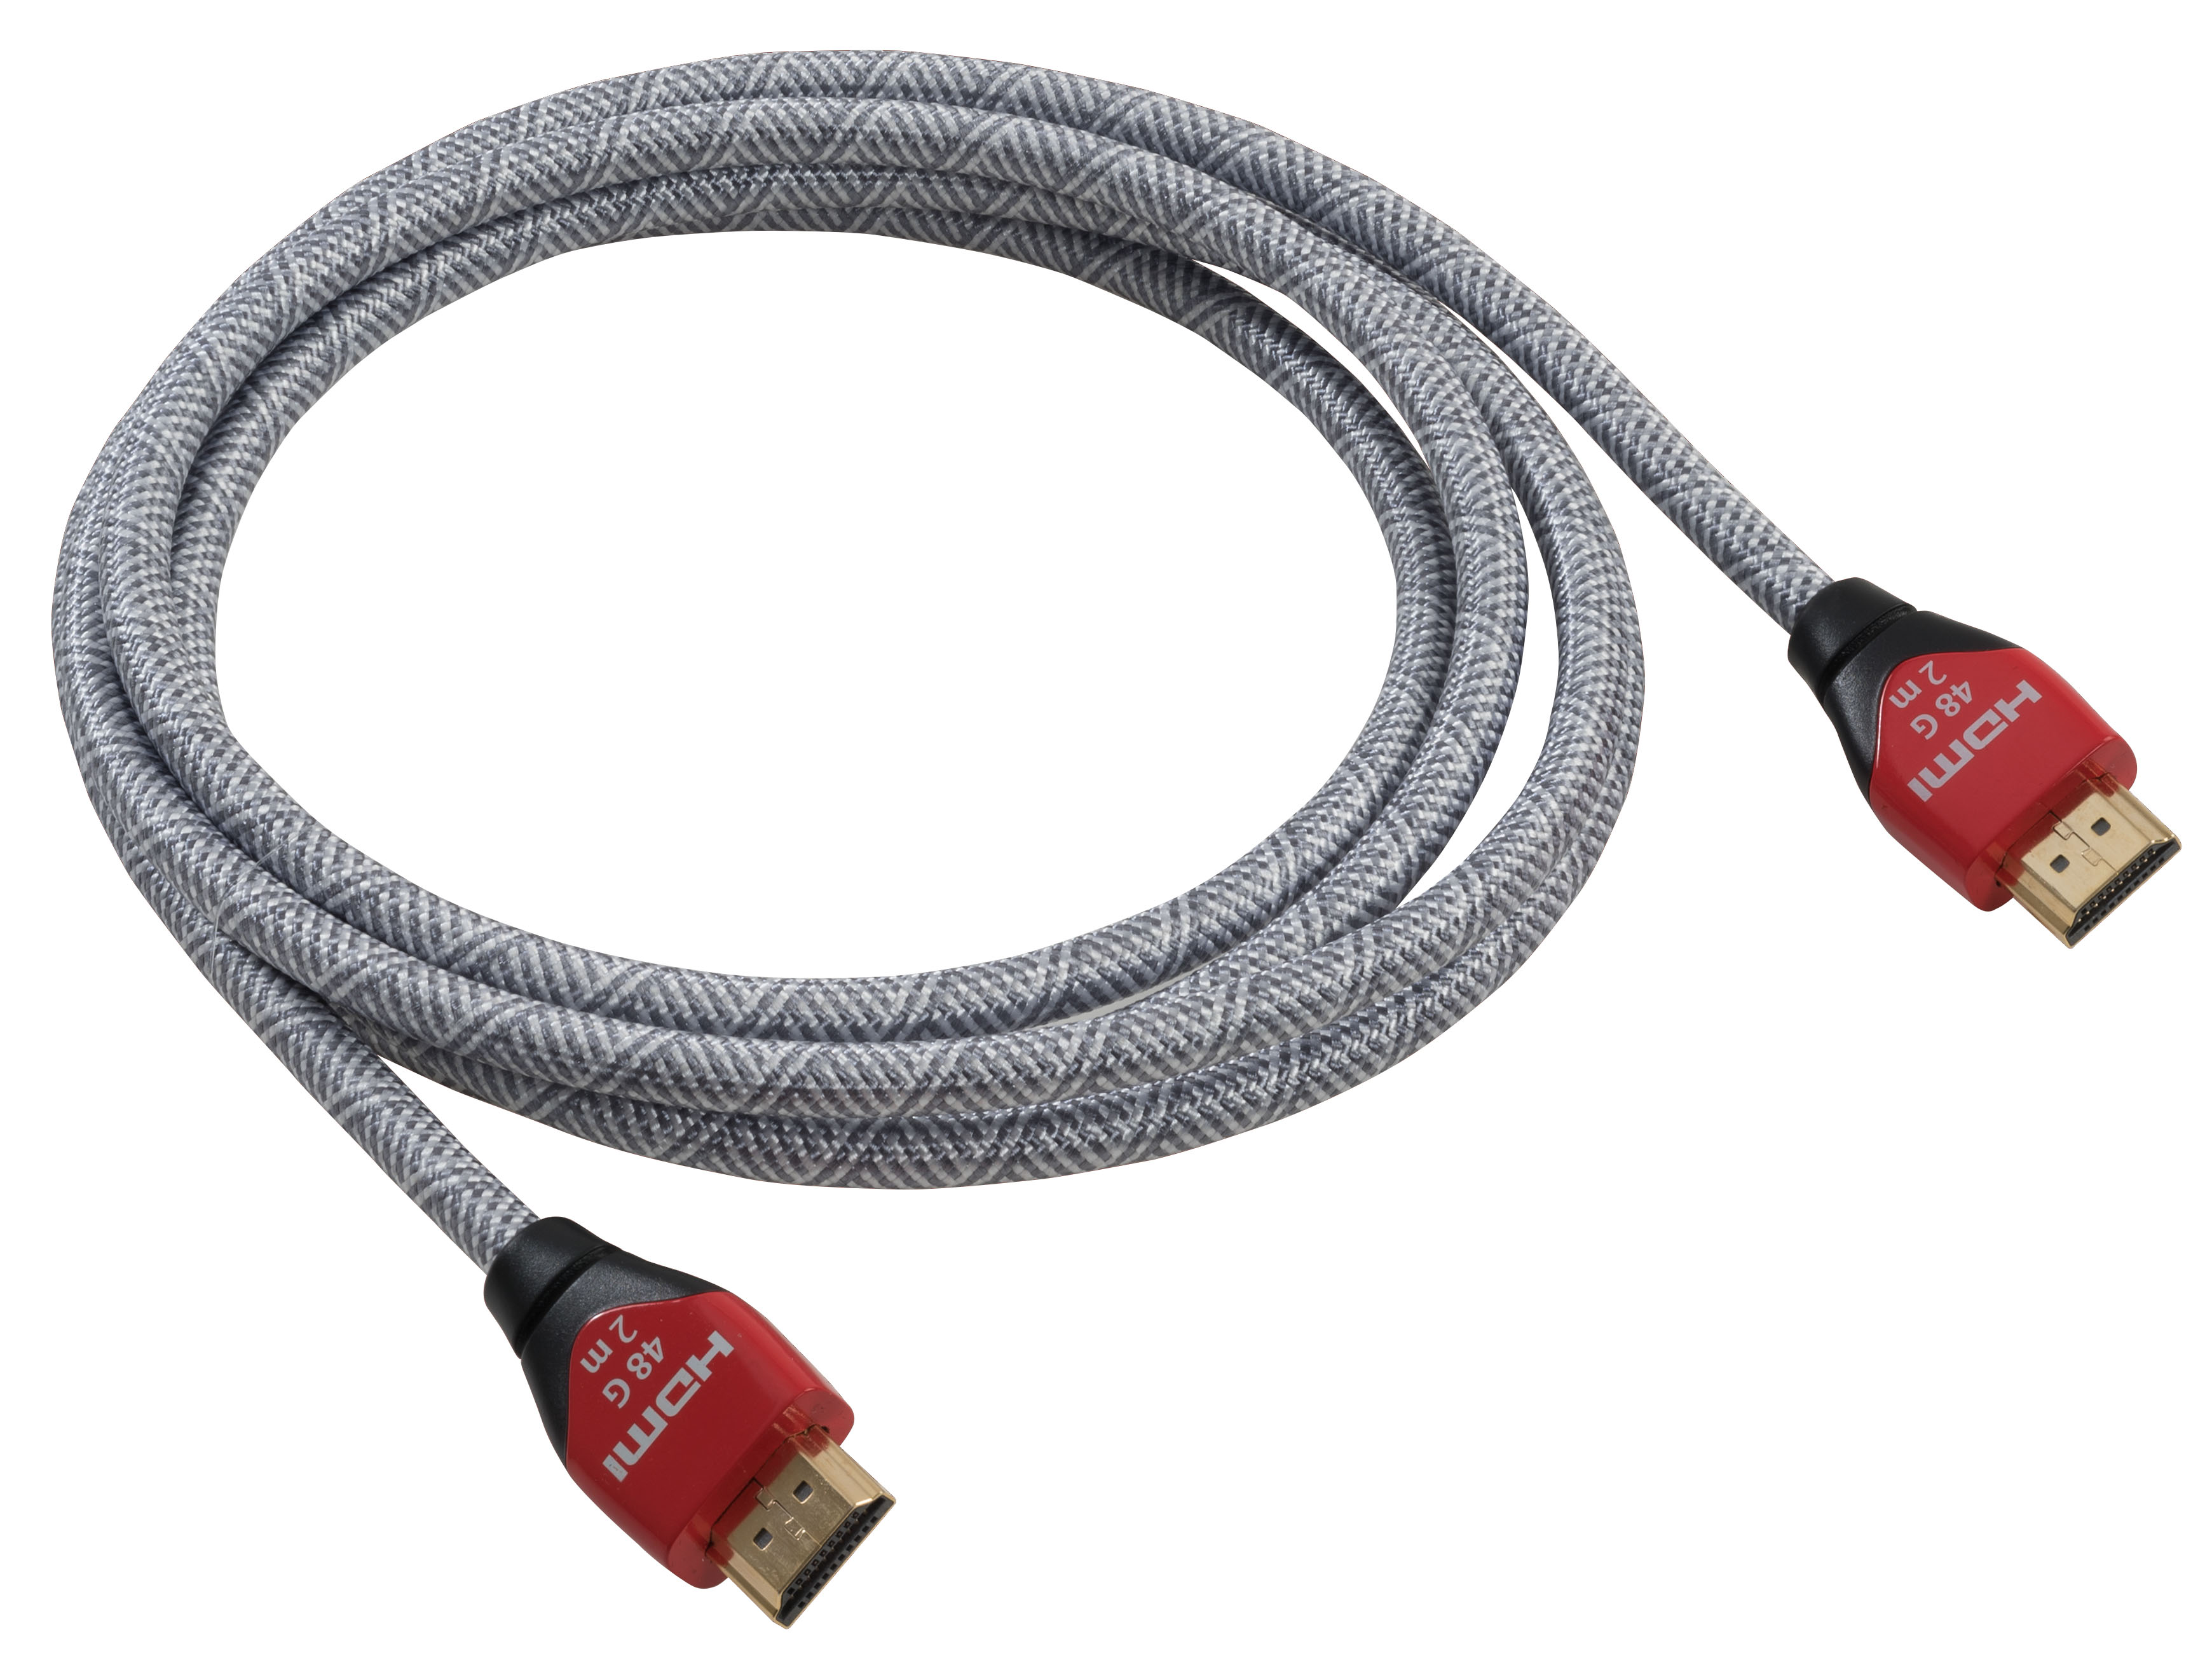 30M HDMI Cable 30 Meter (100' FT) Male to Male Long Length Premium Cable  with EQ Extender, 1M End Cable and Gold Connectors, 24 AWG, High Definition